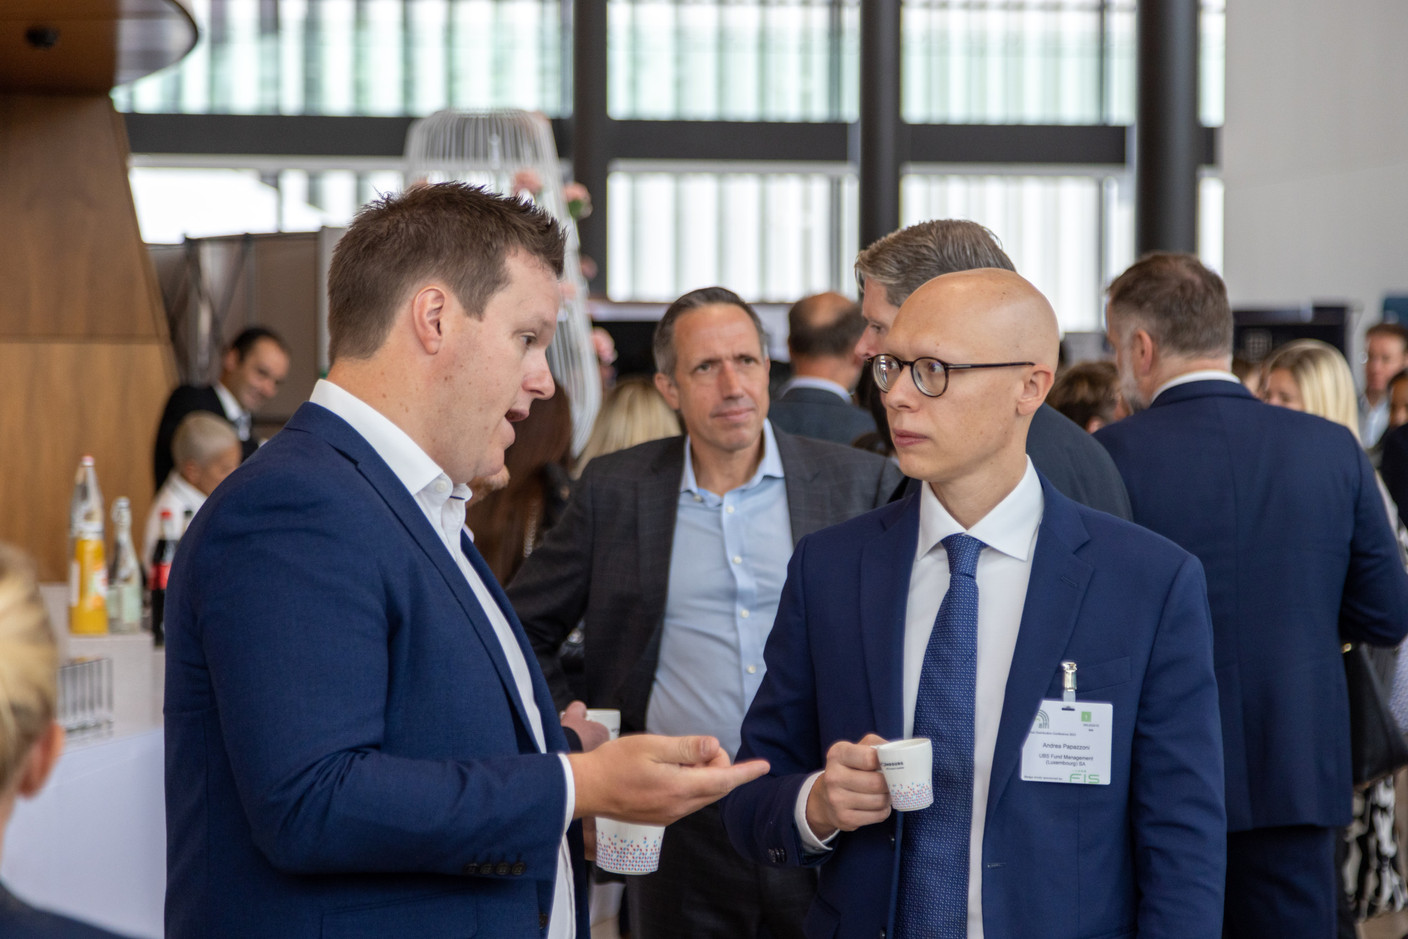 Andrea Papazzoni of UBS Fund Management (on right) is seen attending Alfi’s Global Distribution Conference, 20 September 2022. Photo: Romain Gamba/Maison Moderne